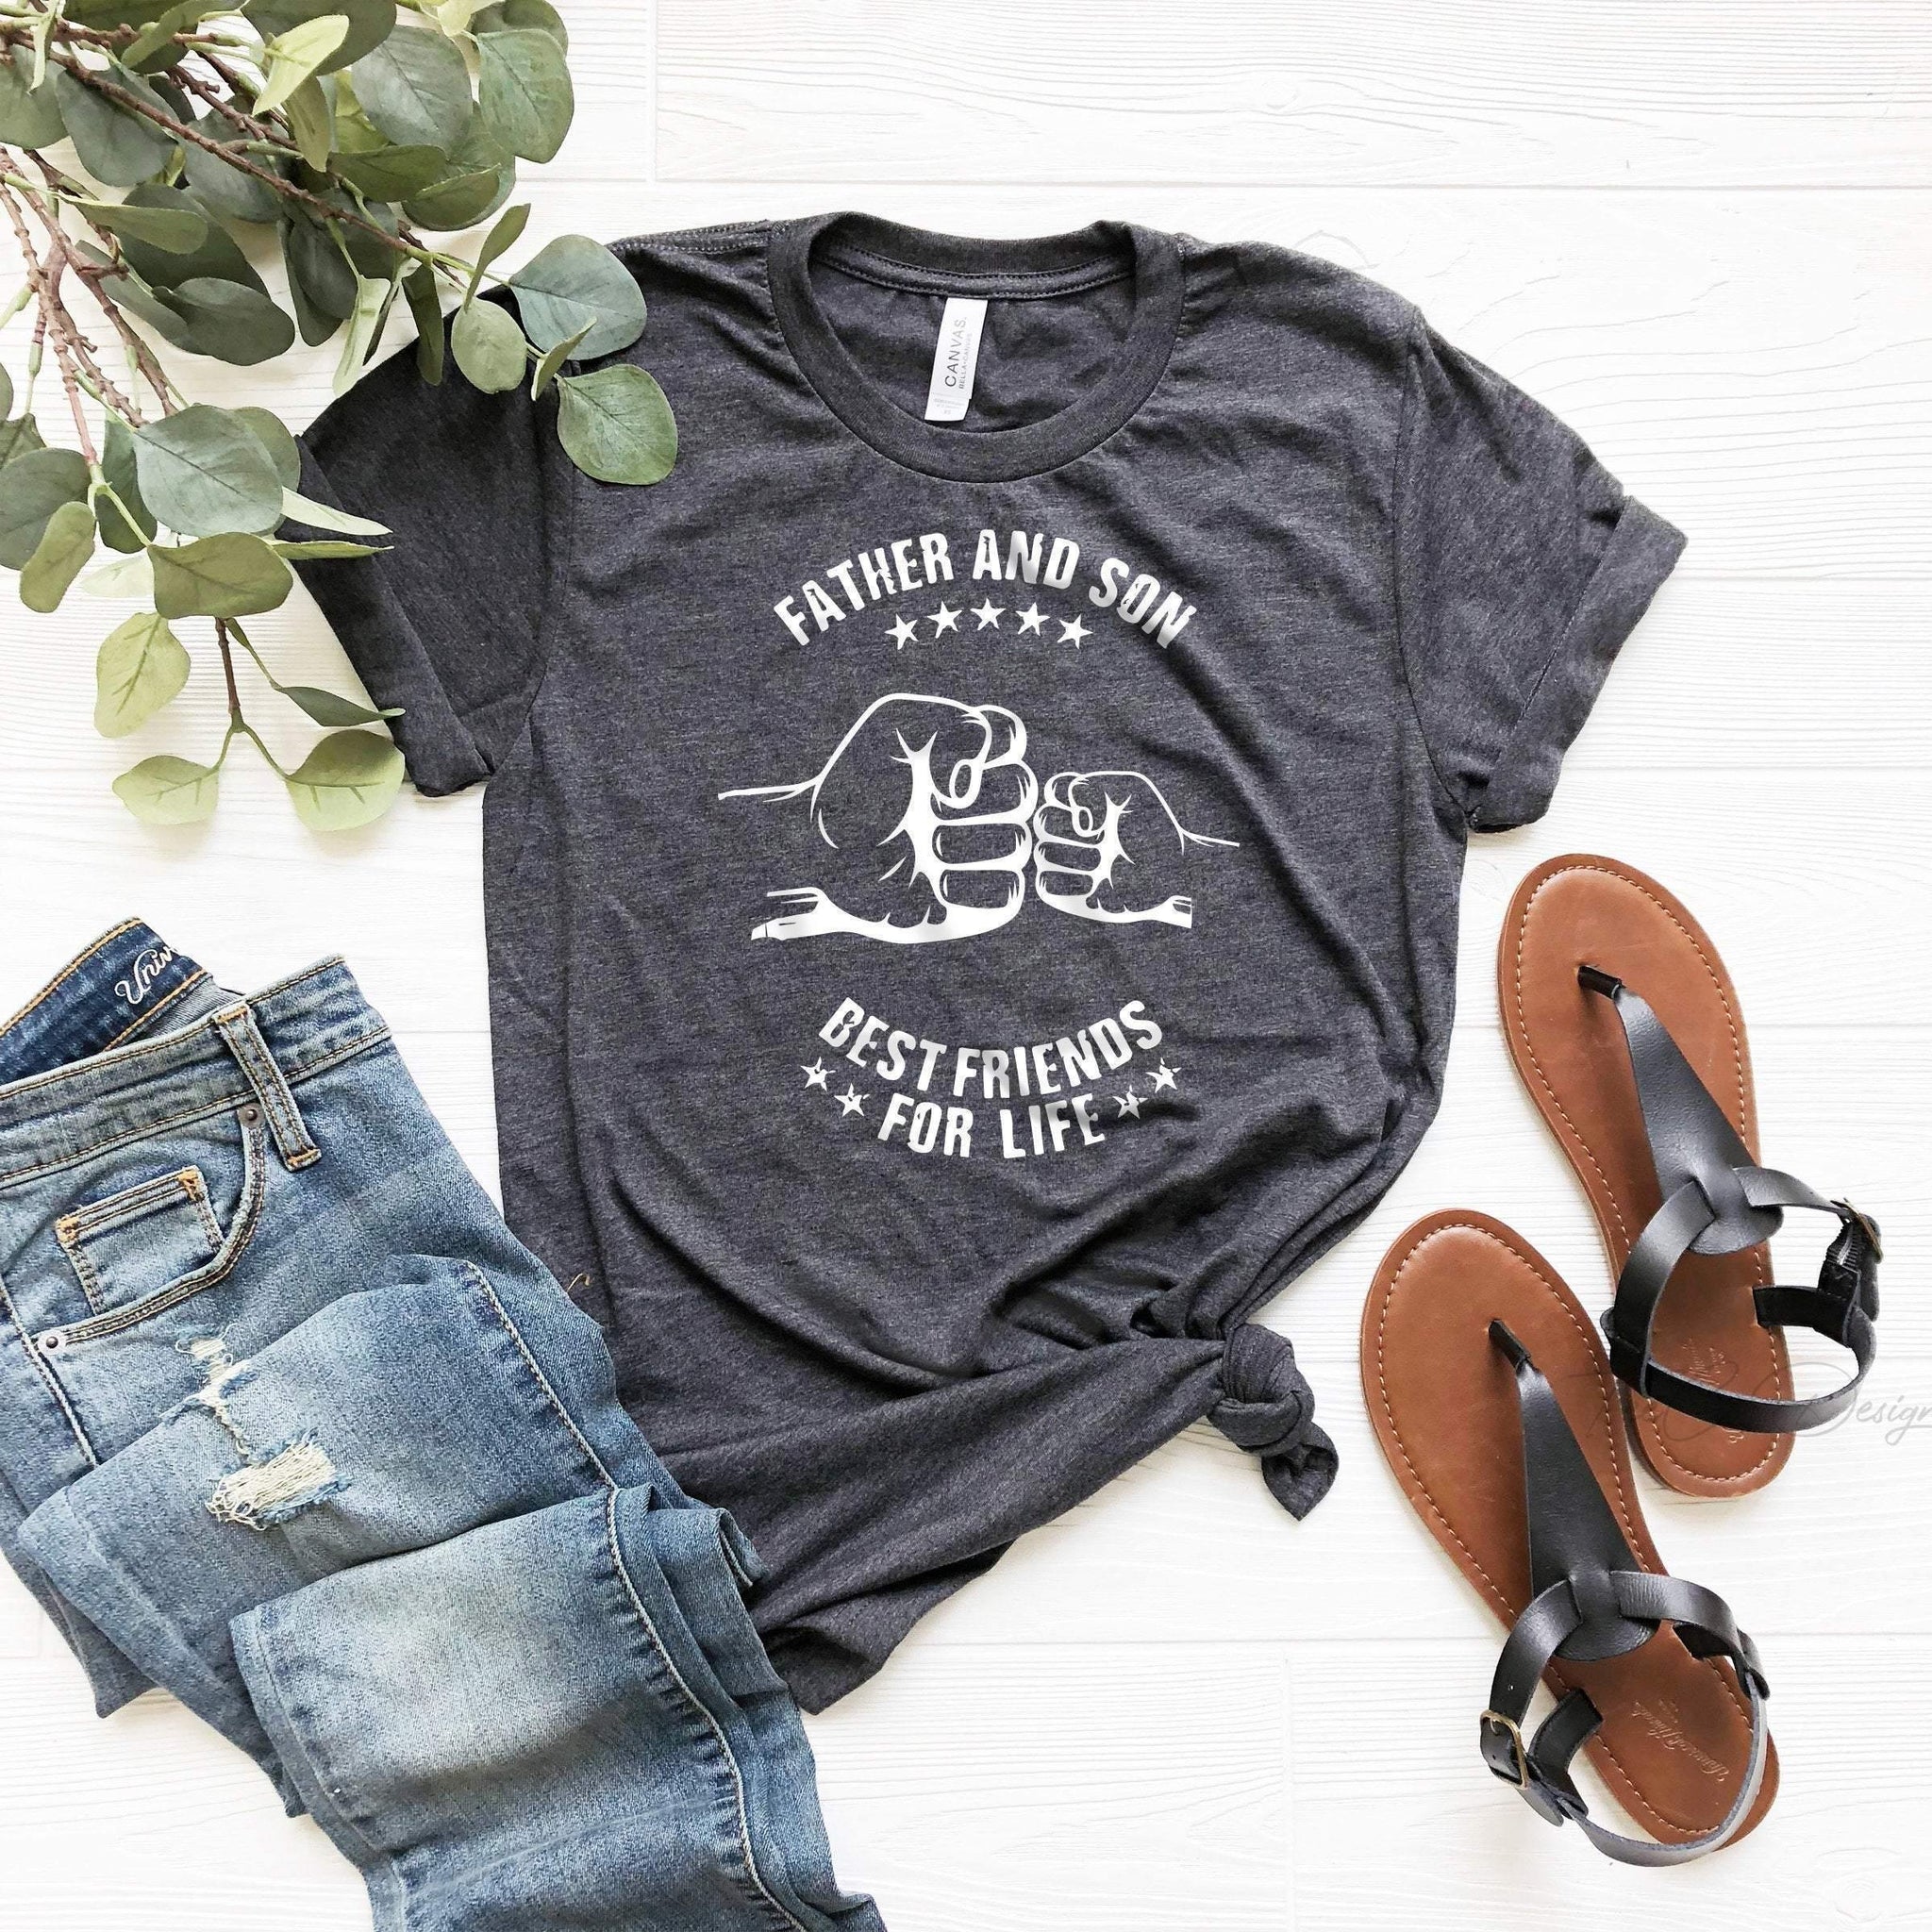 Father and Son Shirt, Dad gift shirts, Dad shirts from daughter, Funny Shirts for dad men husband,Dad Birthday, Fists, Best Friends for Life - Fastdeliverytees.com